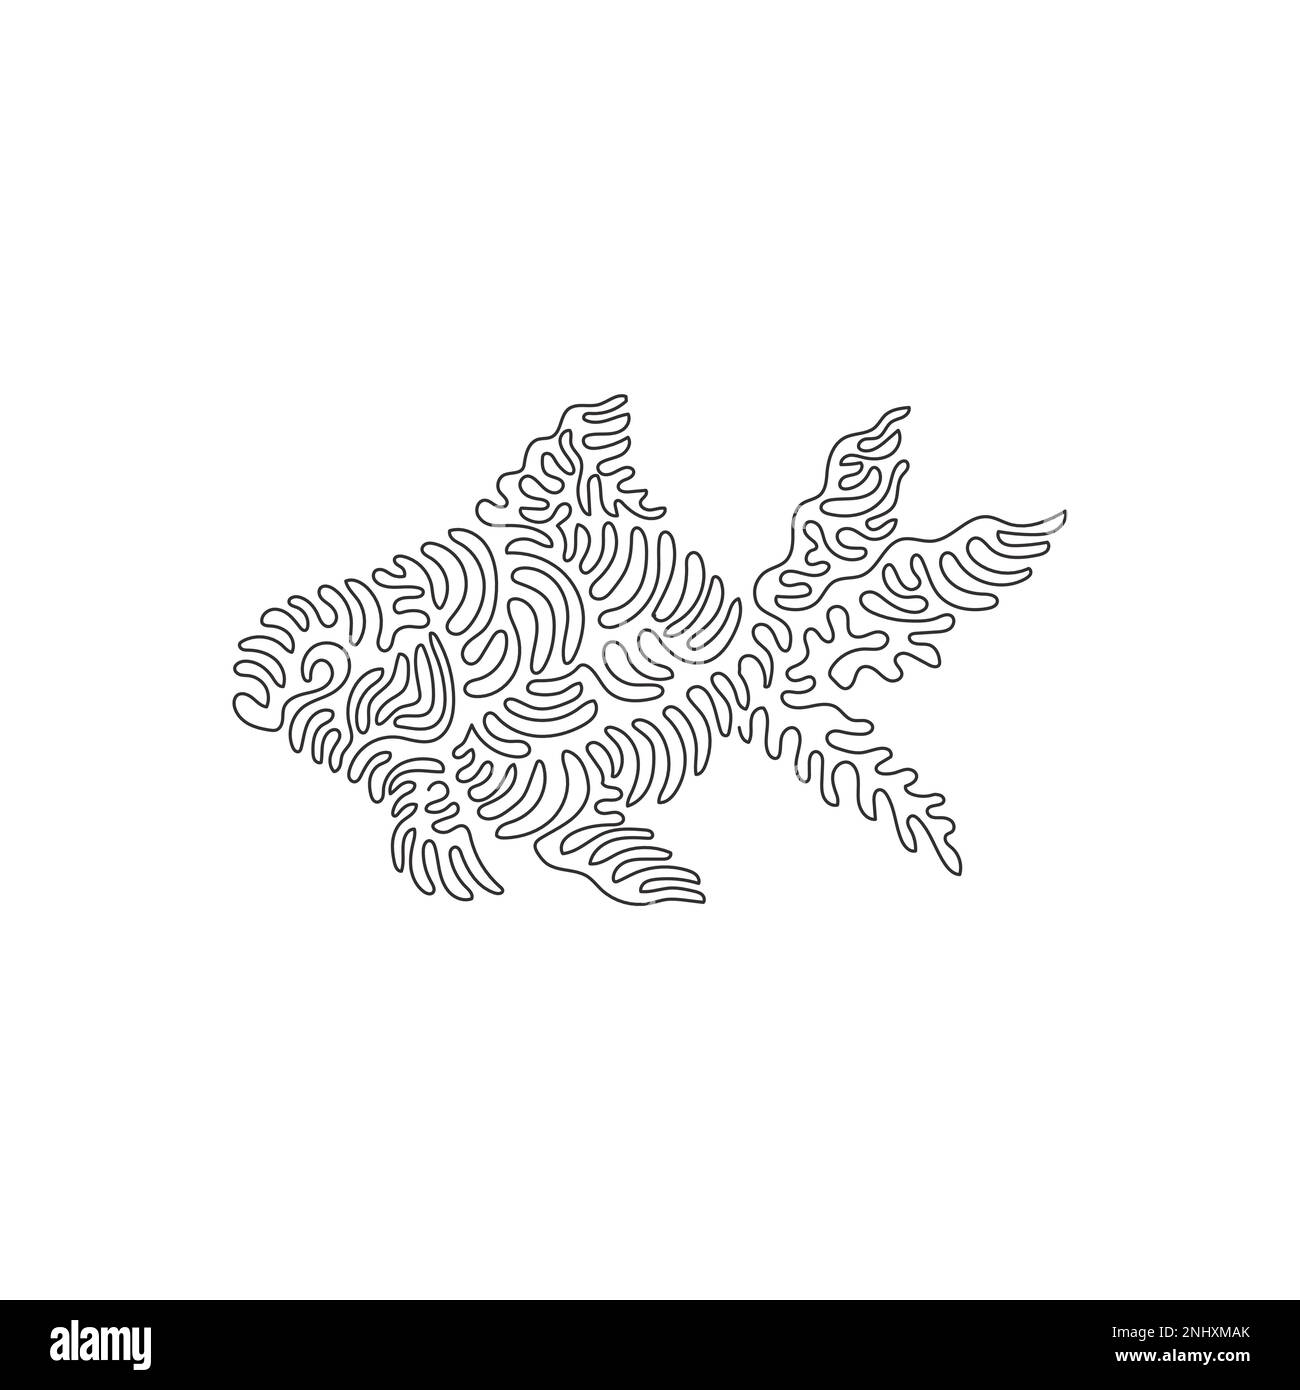 Single one line drawing of beautiful goldfish abstract art. Continuous line draw graphic design vector illustration of cute fin configuration goldfish Stock Vector